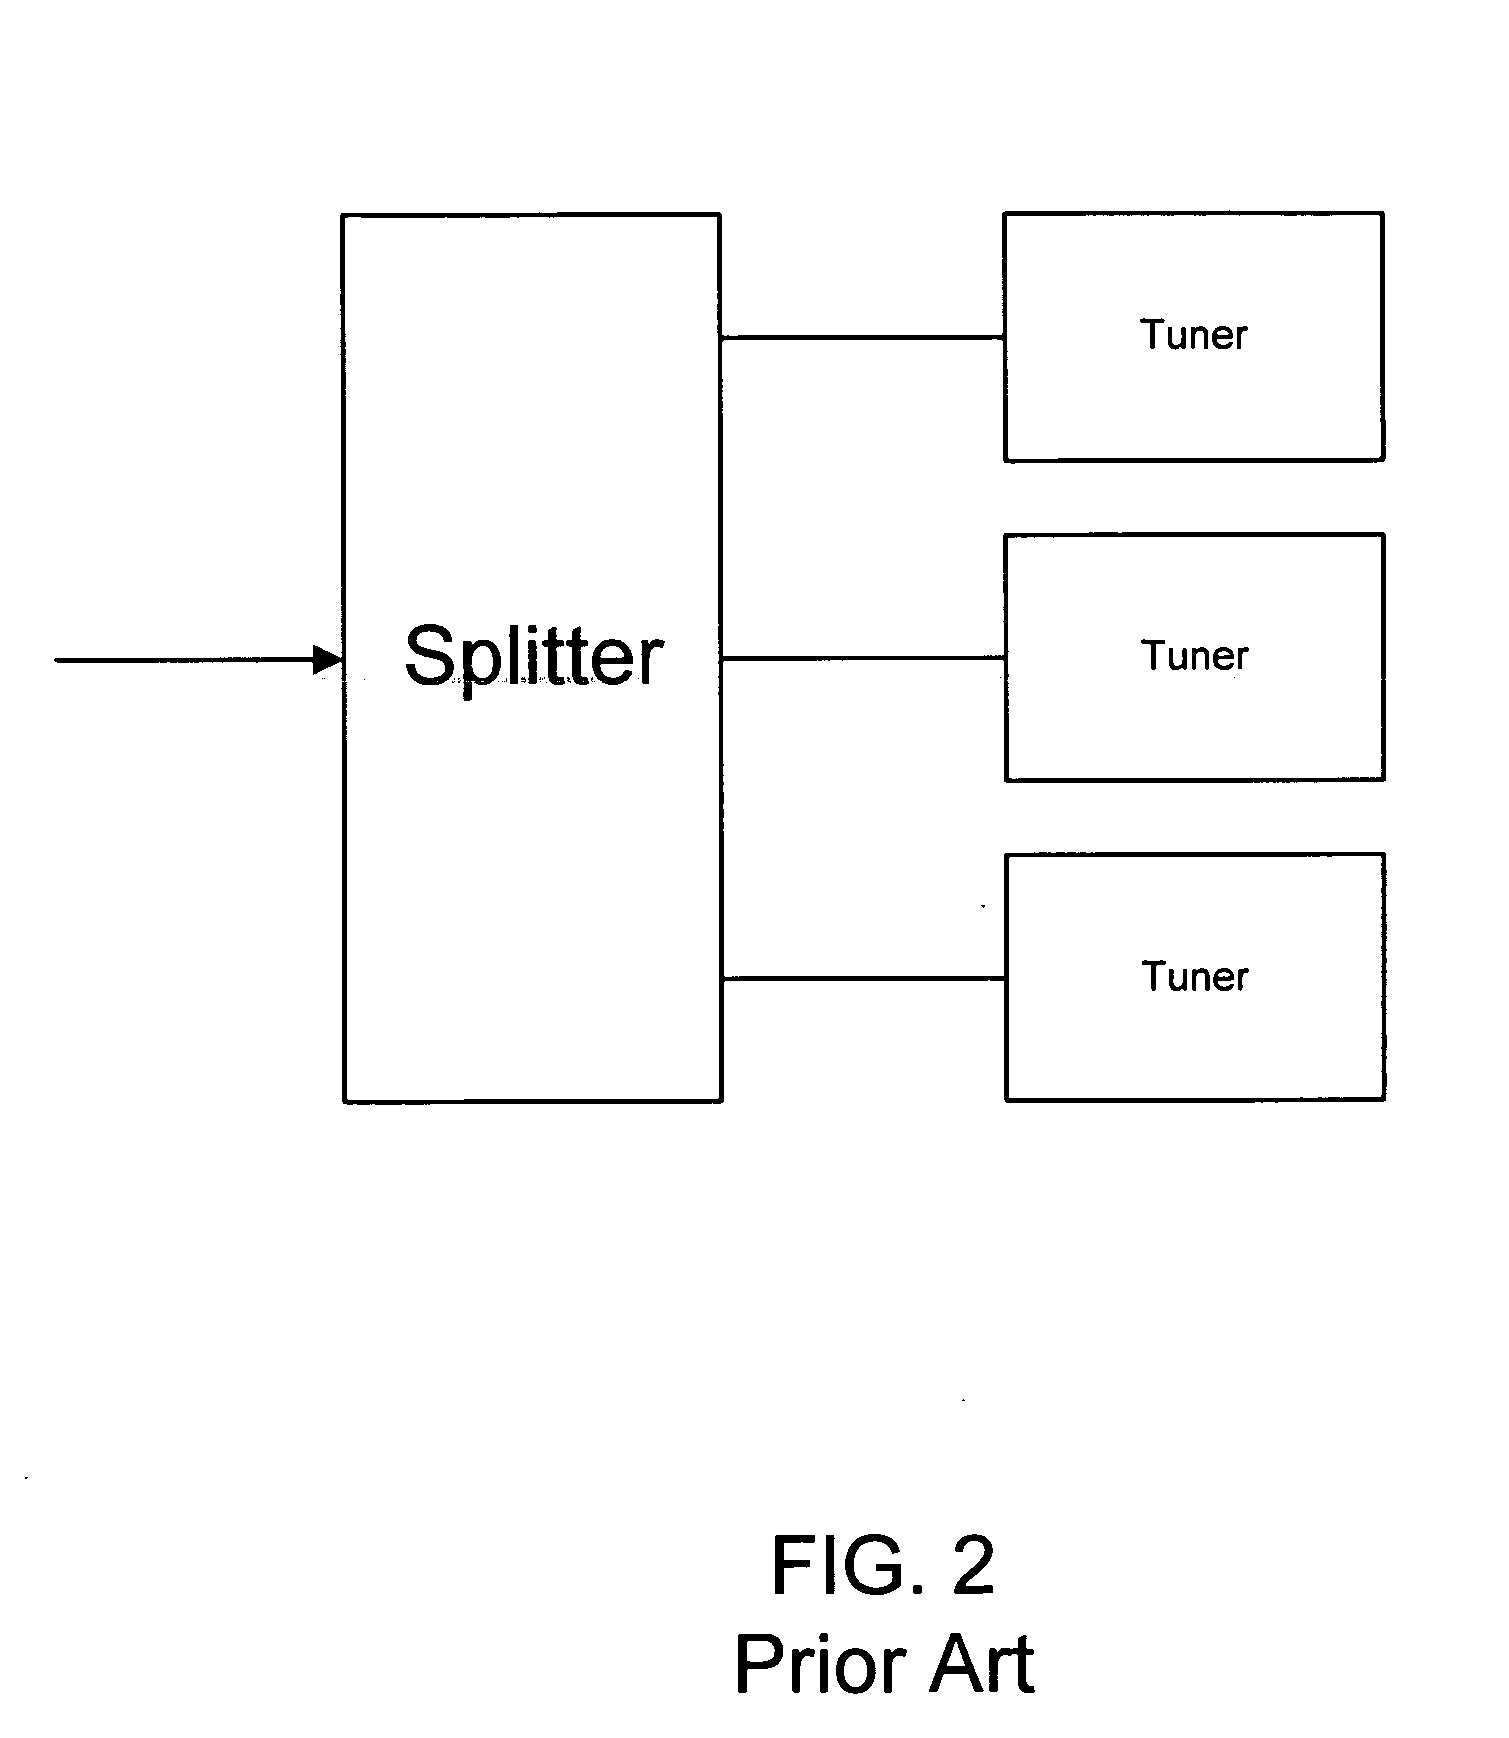 Method and apparatus for distributing multiple signal inputs to multiple integrated circuits